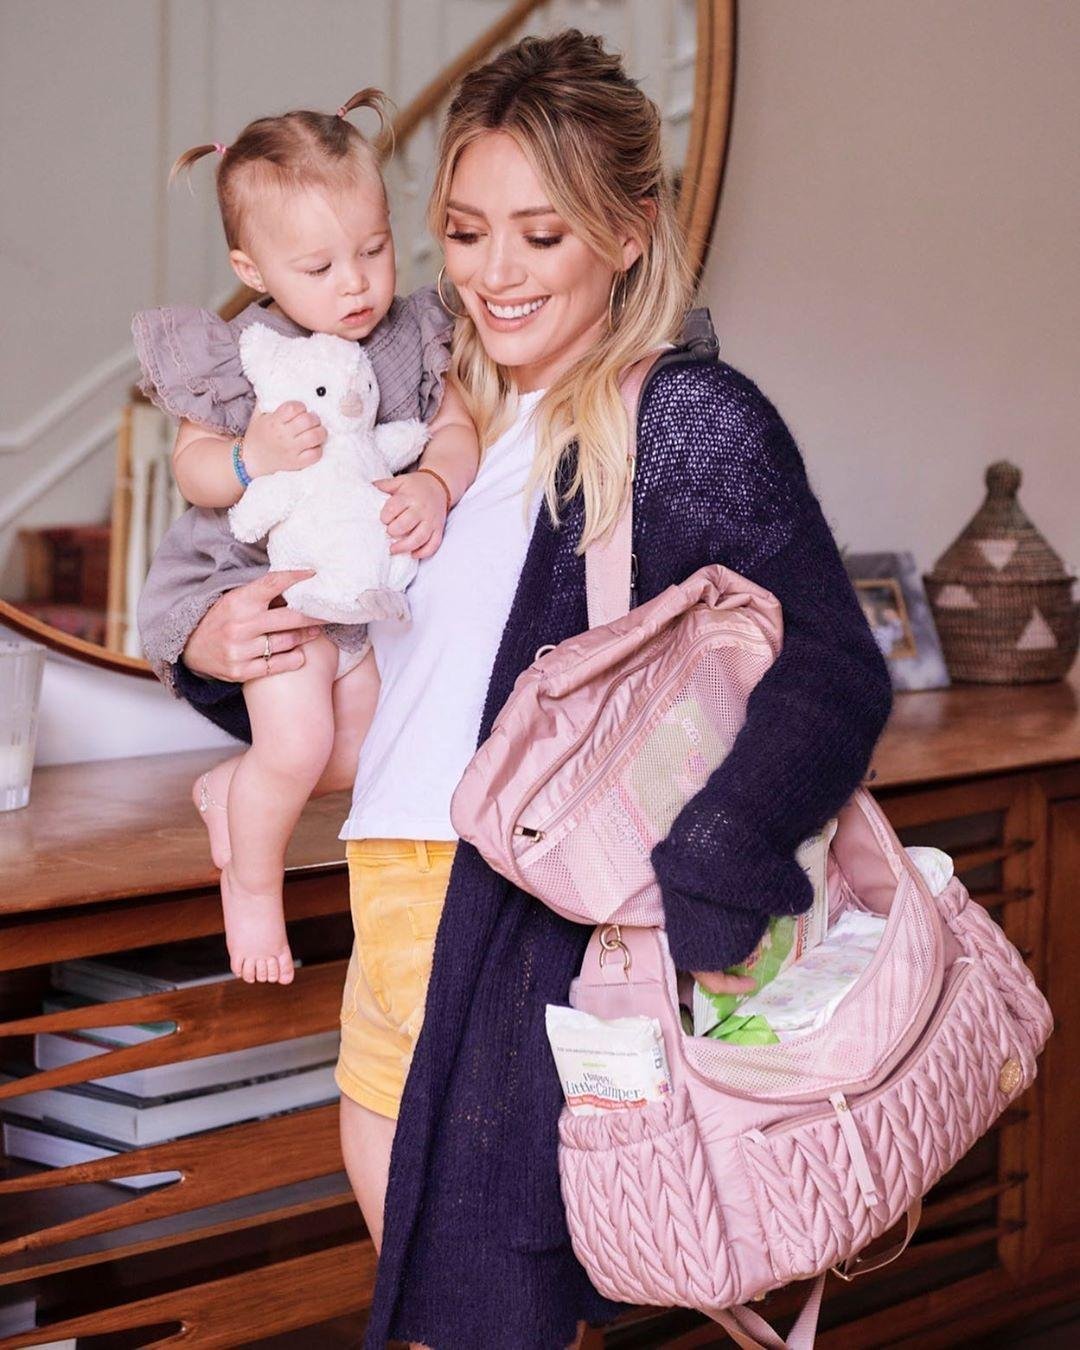 Actress Hilary Duff spoke about her everyday life as a